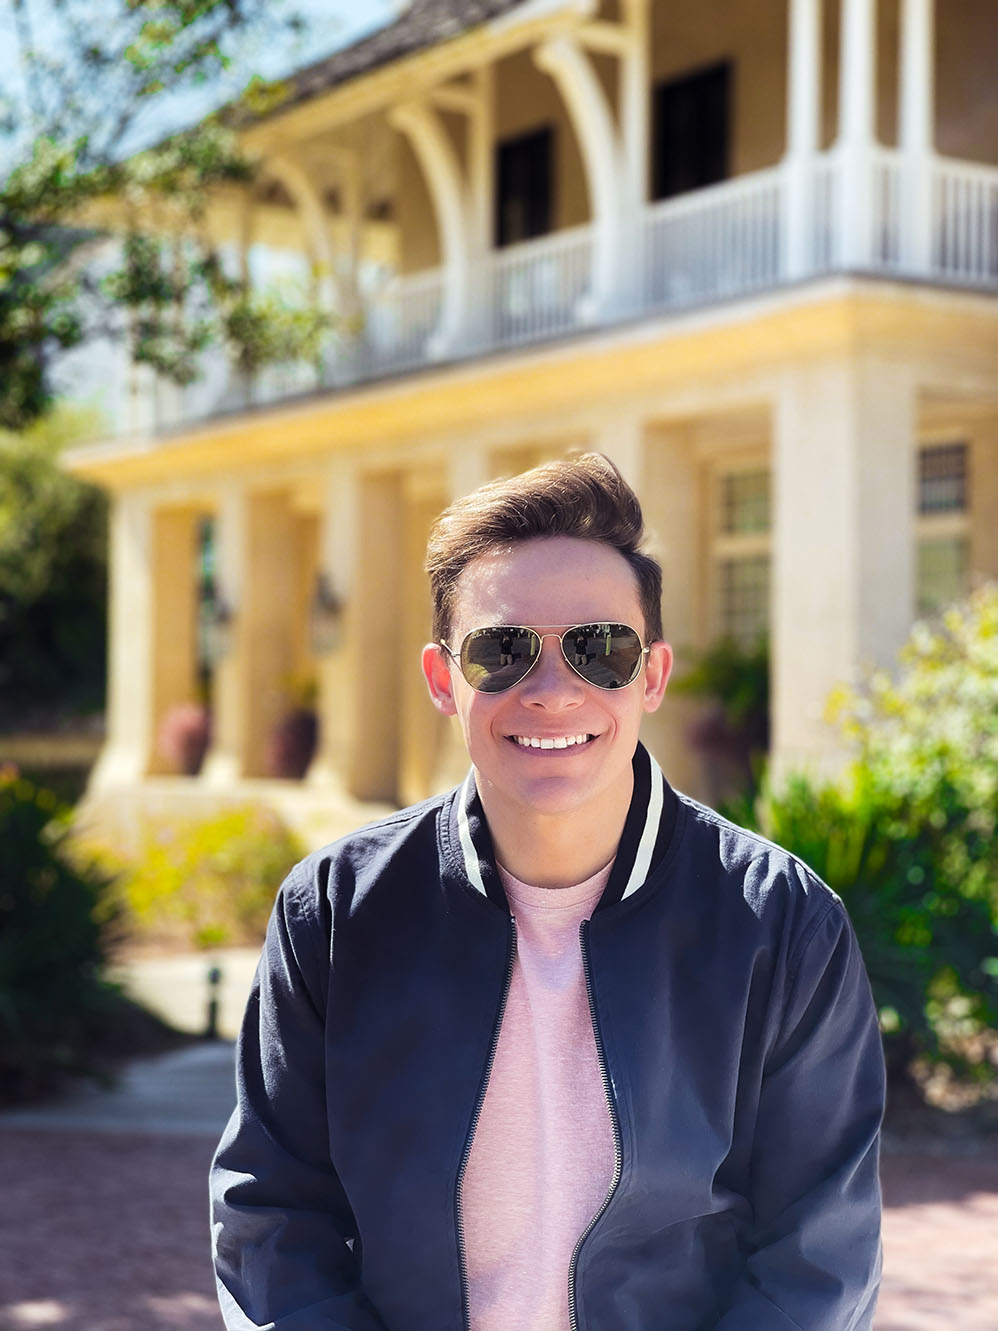 Adam in front of home in Rosemary Beach, Florida.